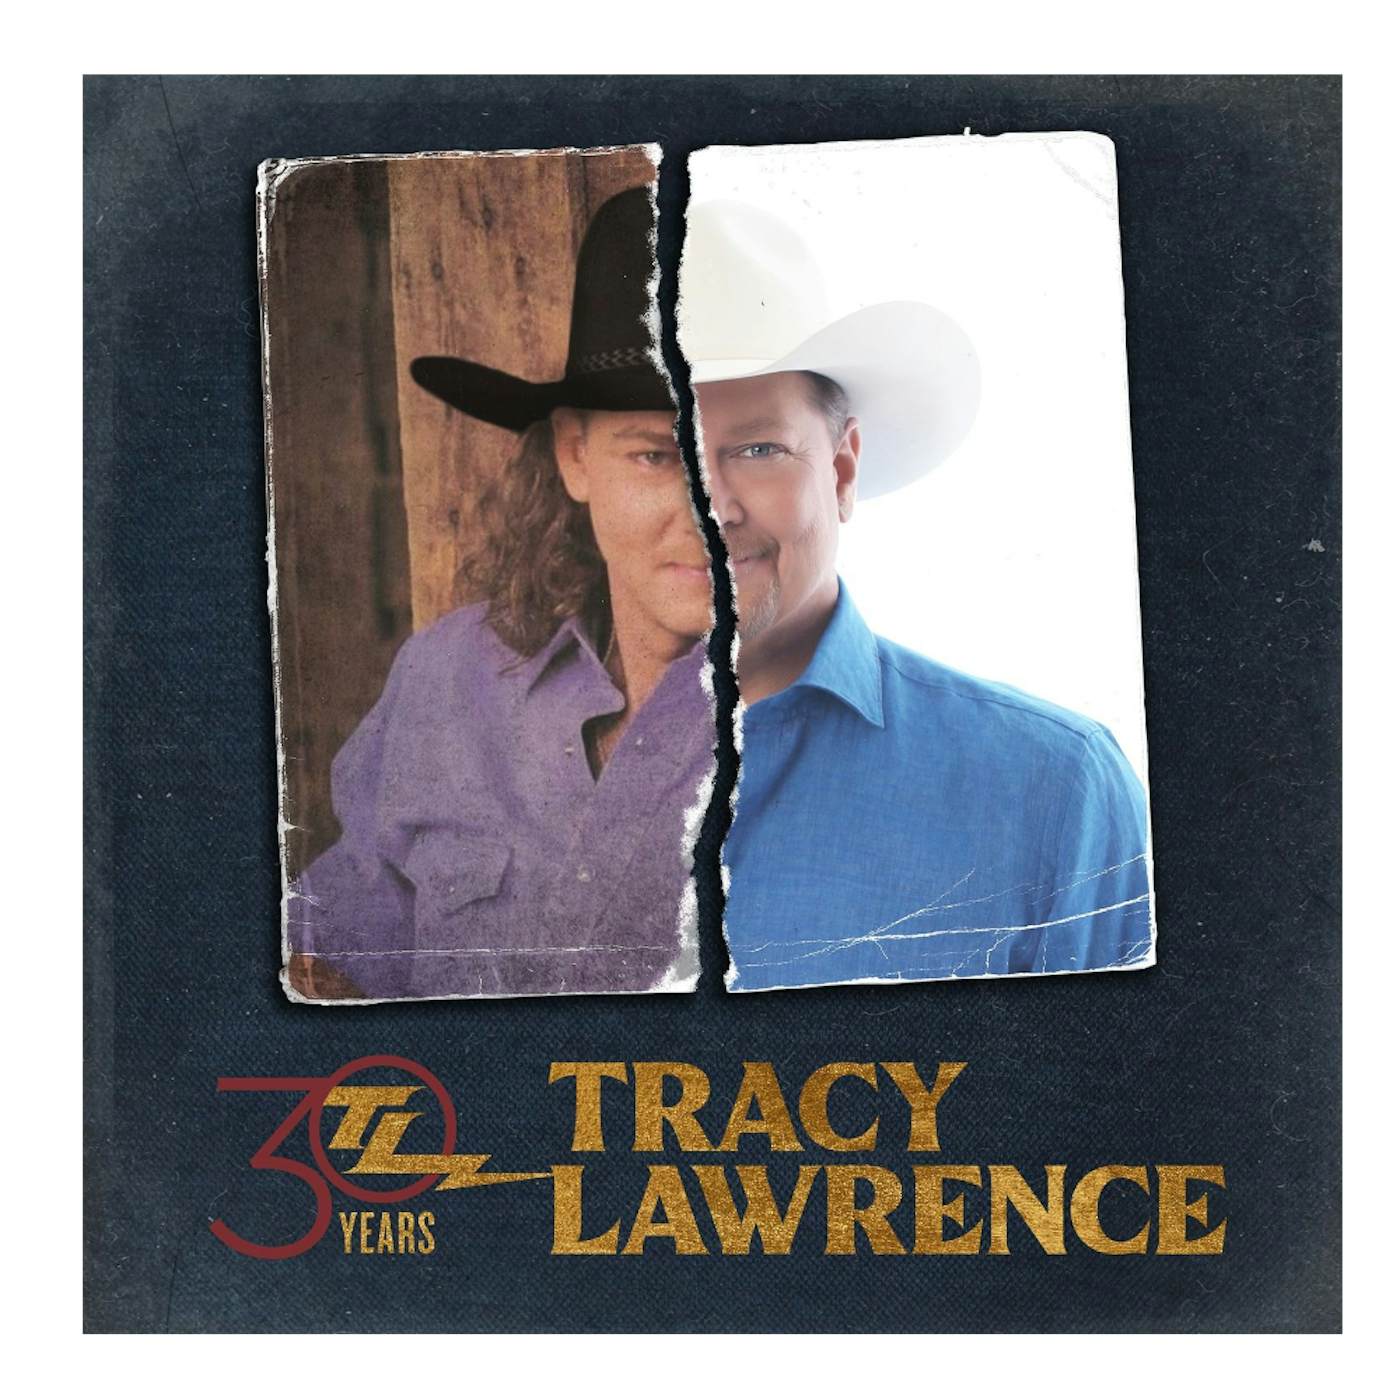 Tracy Lawrence Hindsight Deluxe CD Bundle